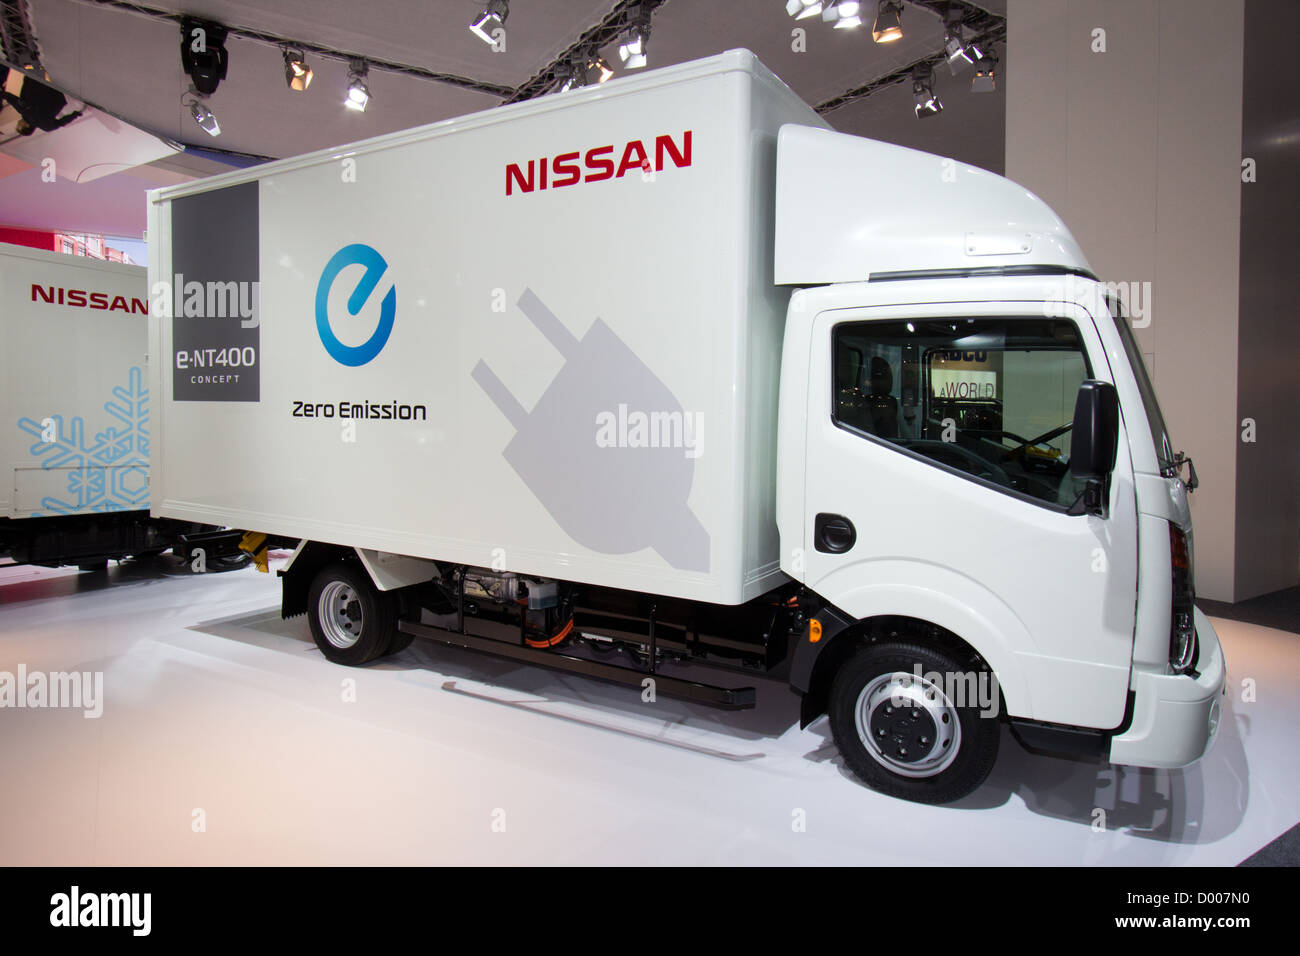 New Electric Nissan E-NT400 Concept Truck at the International for Commercial Vehicles in Hannover, Germany Stock Photo